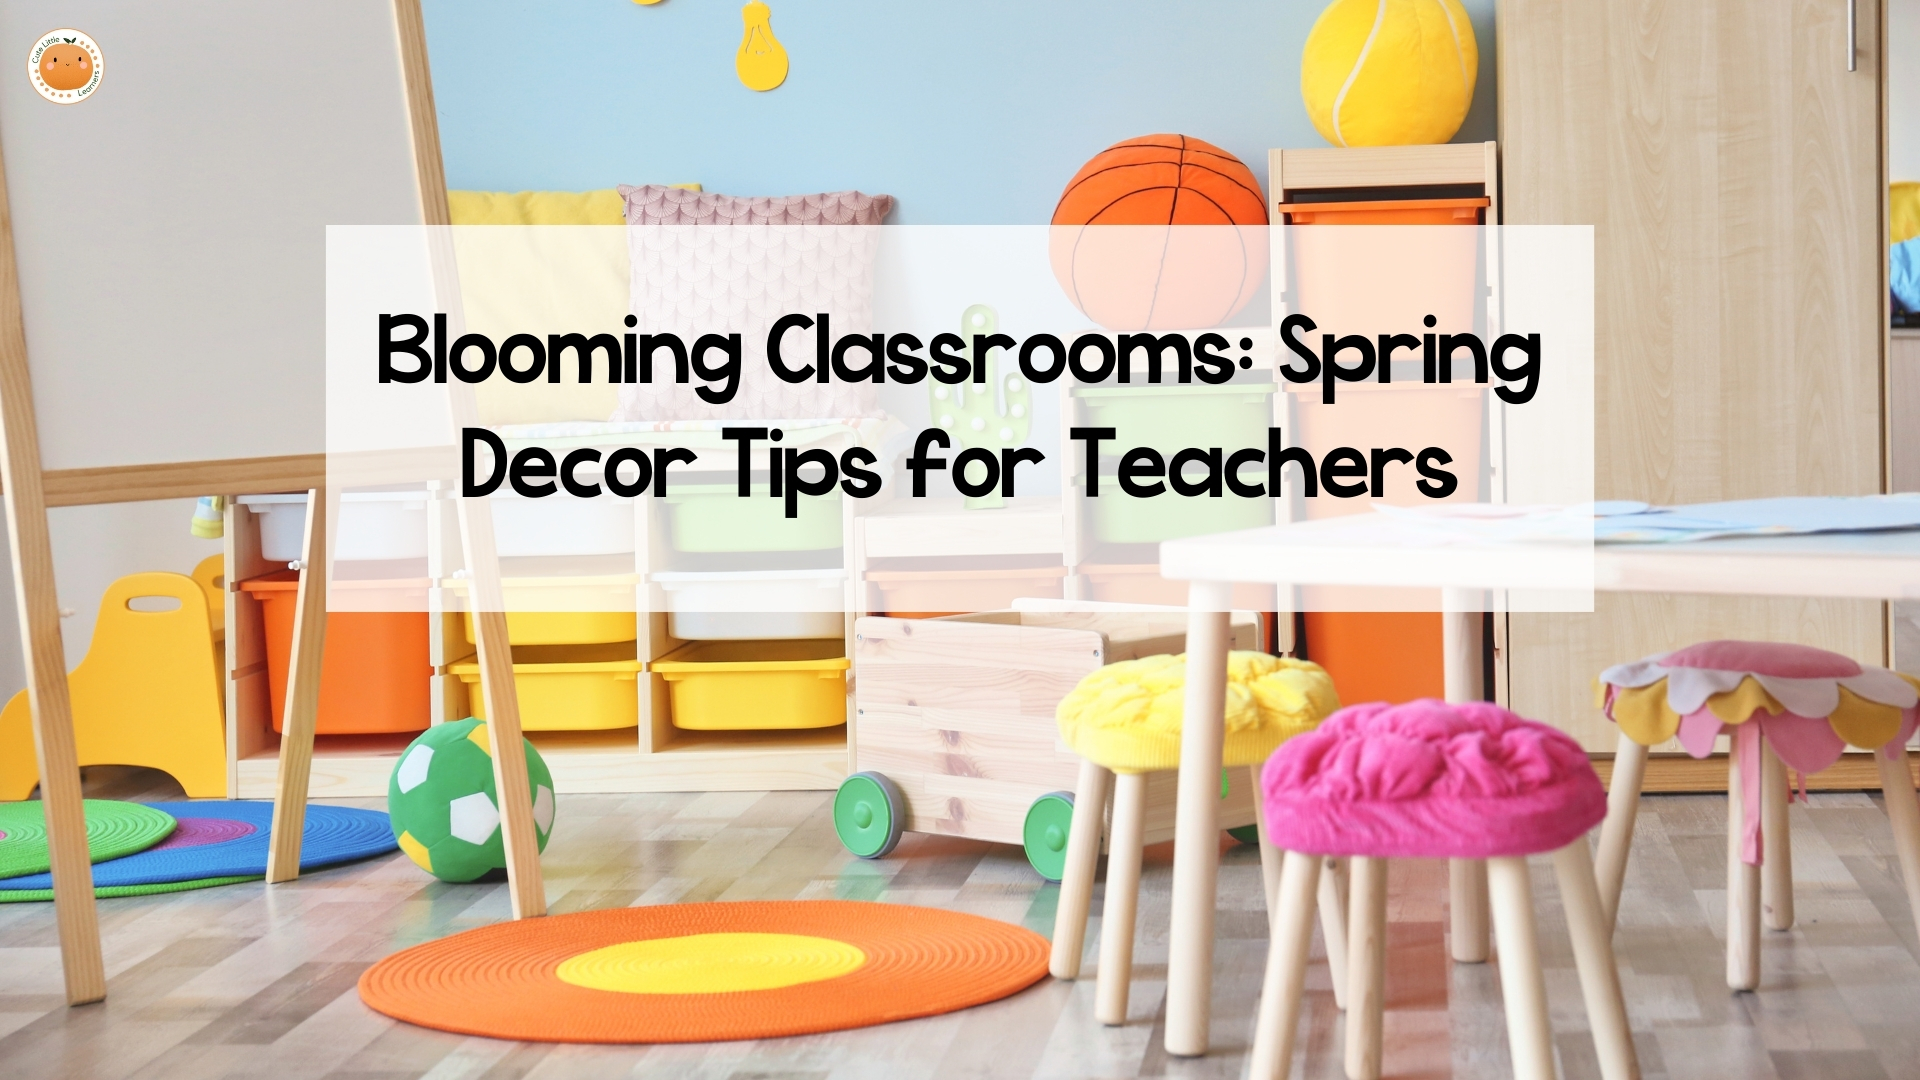 Blooming Classrooms: Spring Decor Tips for Teachers